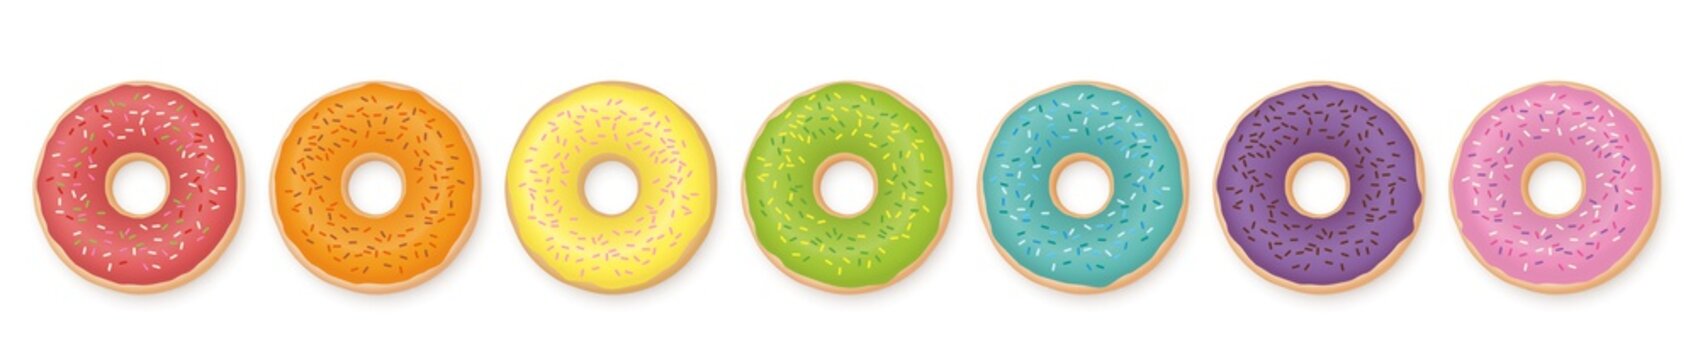 Donuts. Rainbow colored set of seven donuts. Isolated vector illustration on white background.